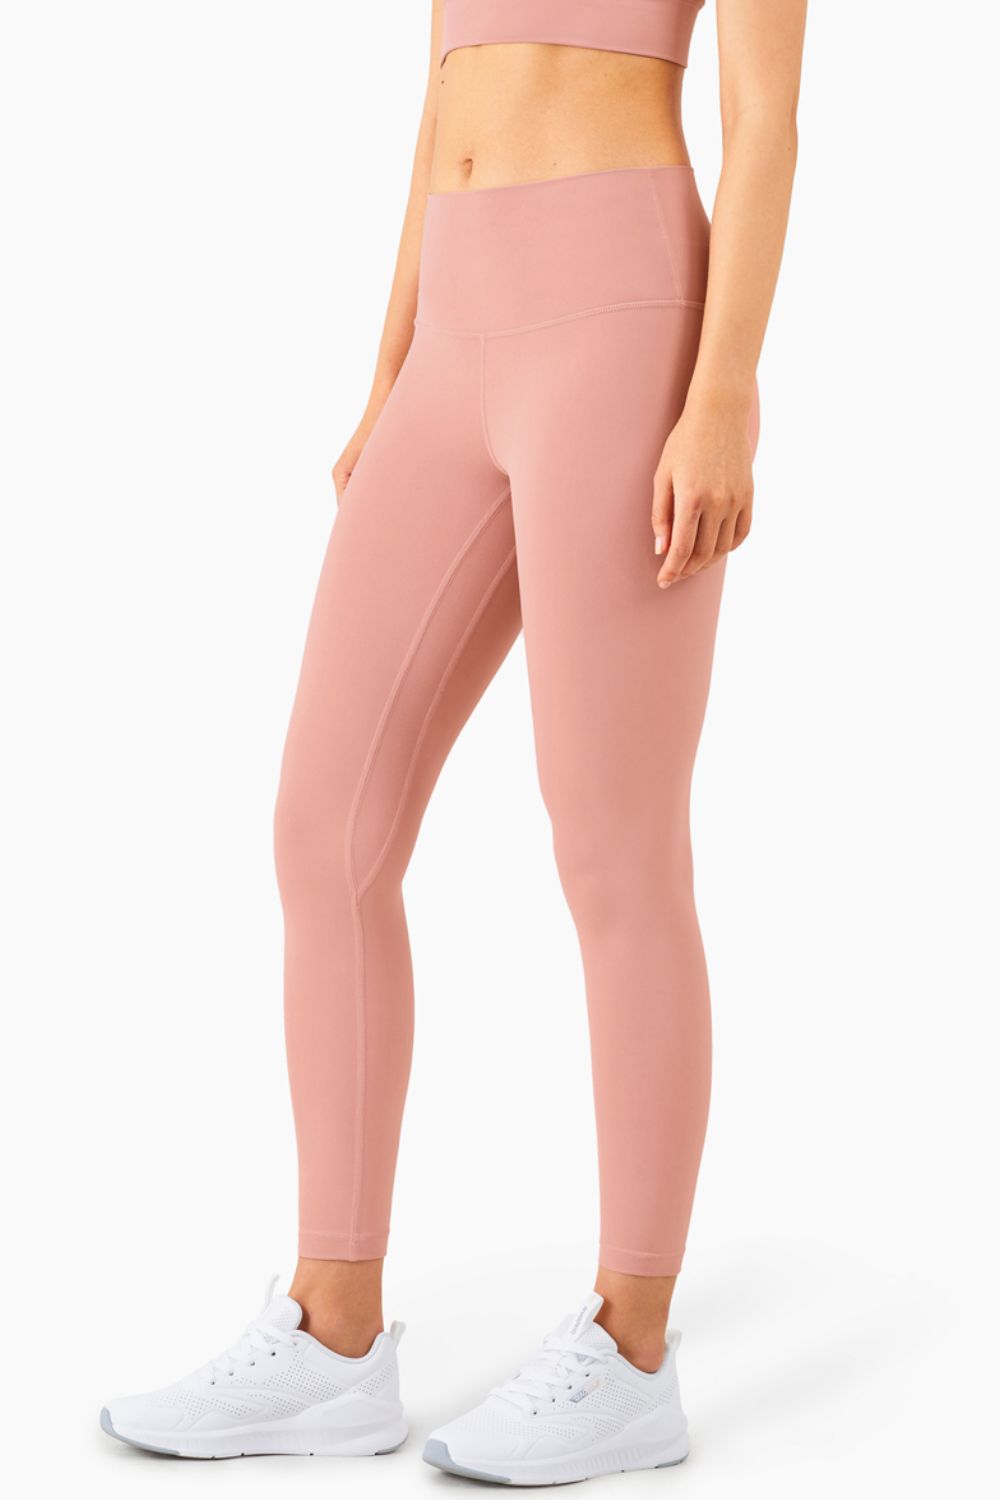 Take A Hike Yoga Leggings - Pink / 4 - Women’s Clothing & Accessories - Activewear - 15 - 2024